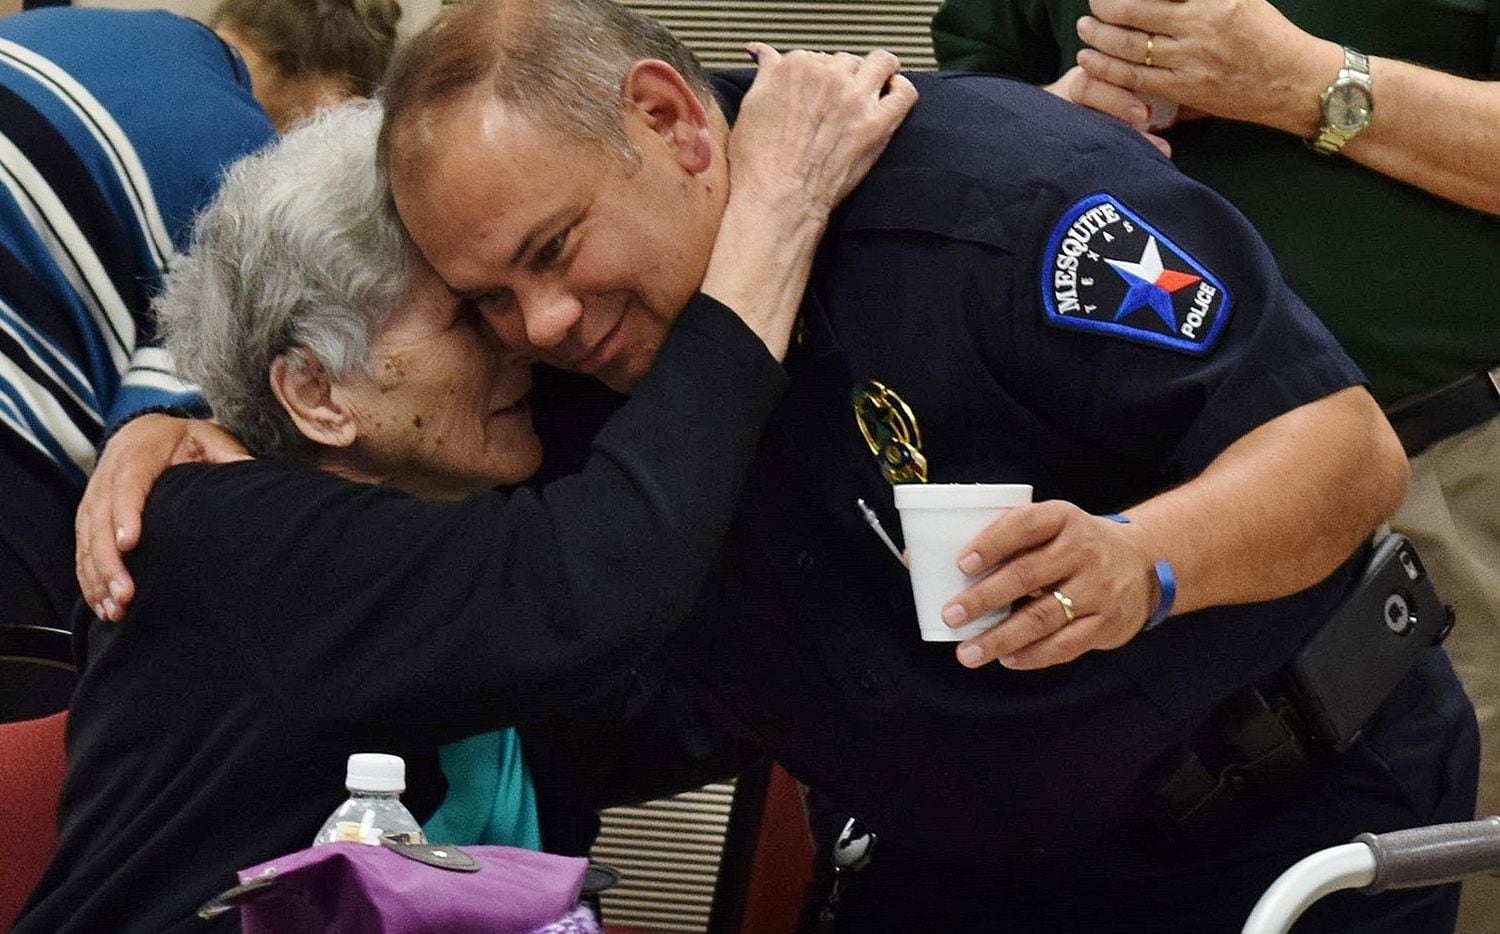 Police Chief Charles Cato gets a hug from a resident at a senior center in Mesquite.